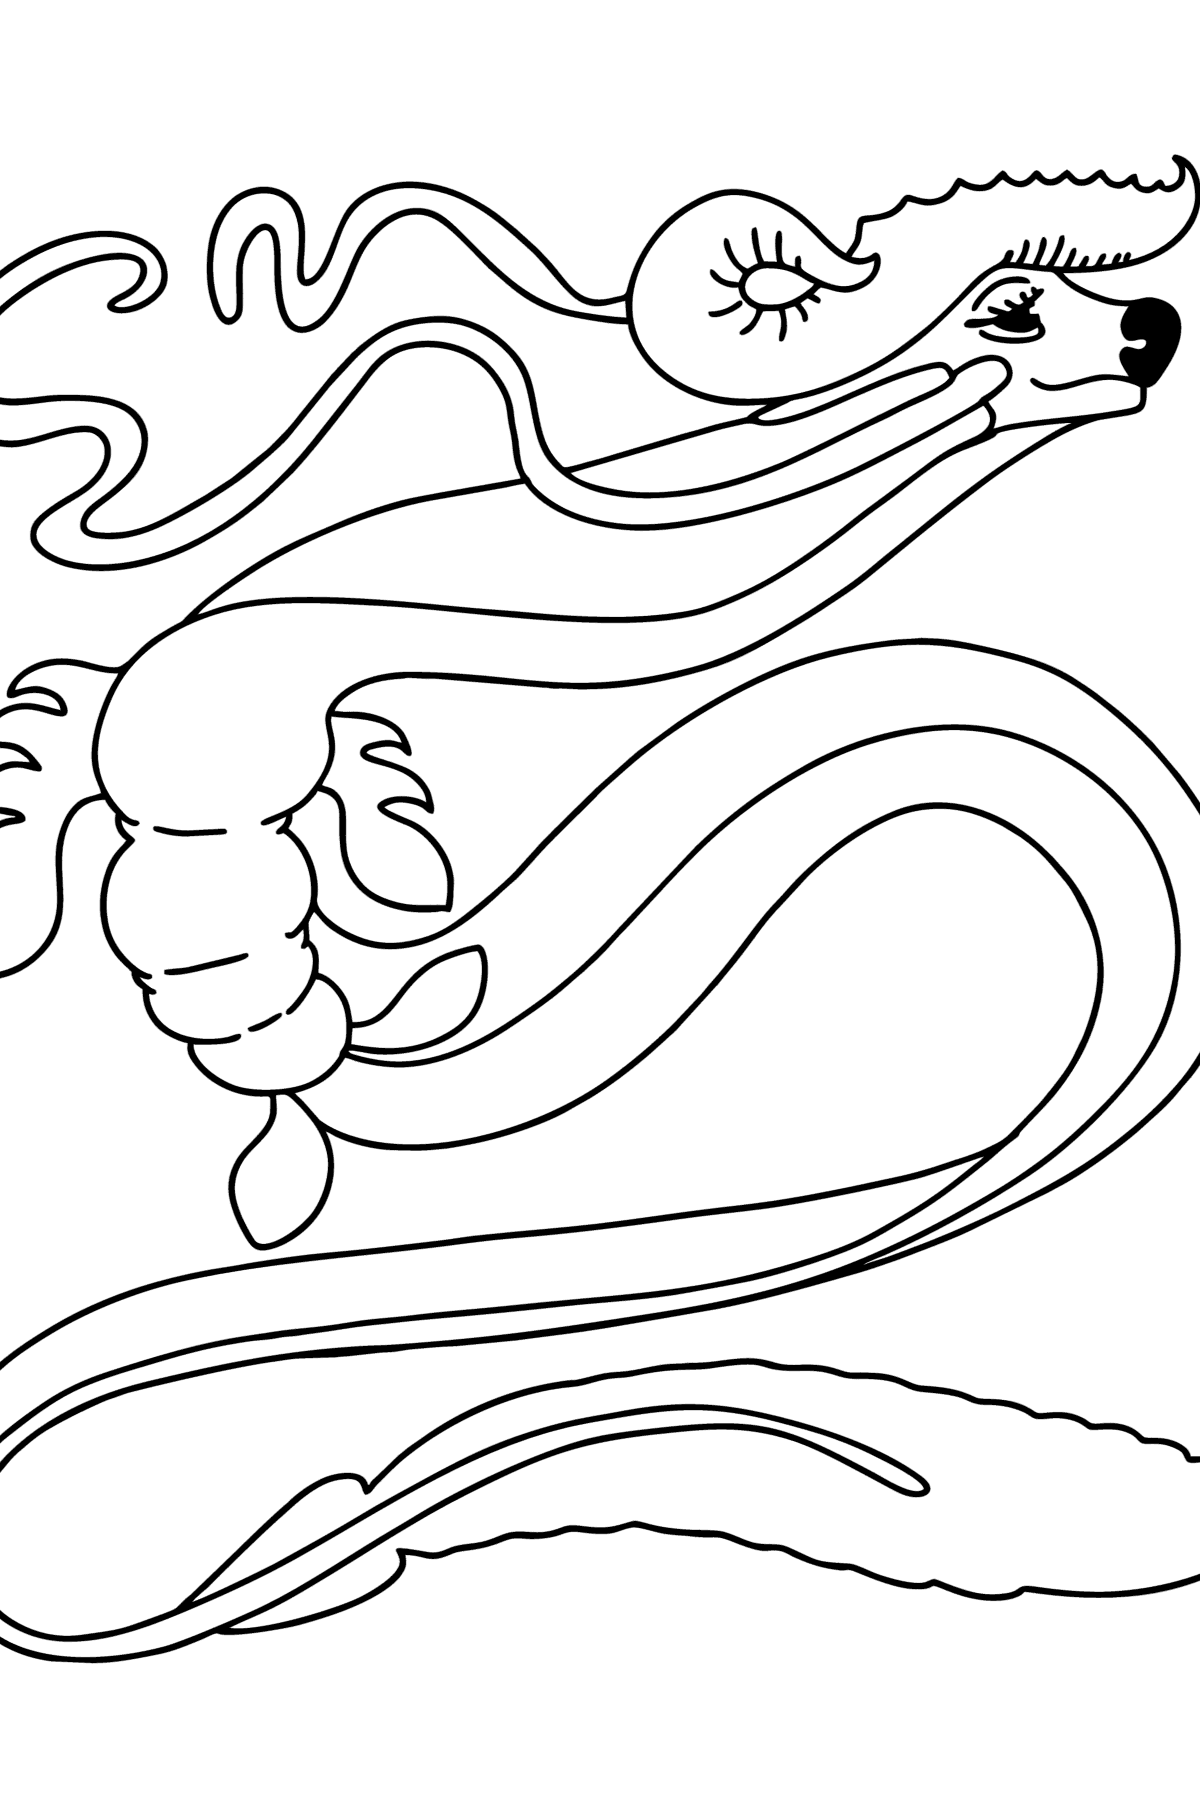 Snake Dragon coloring page - Coloring Pages for Kids